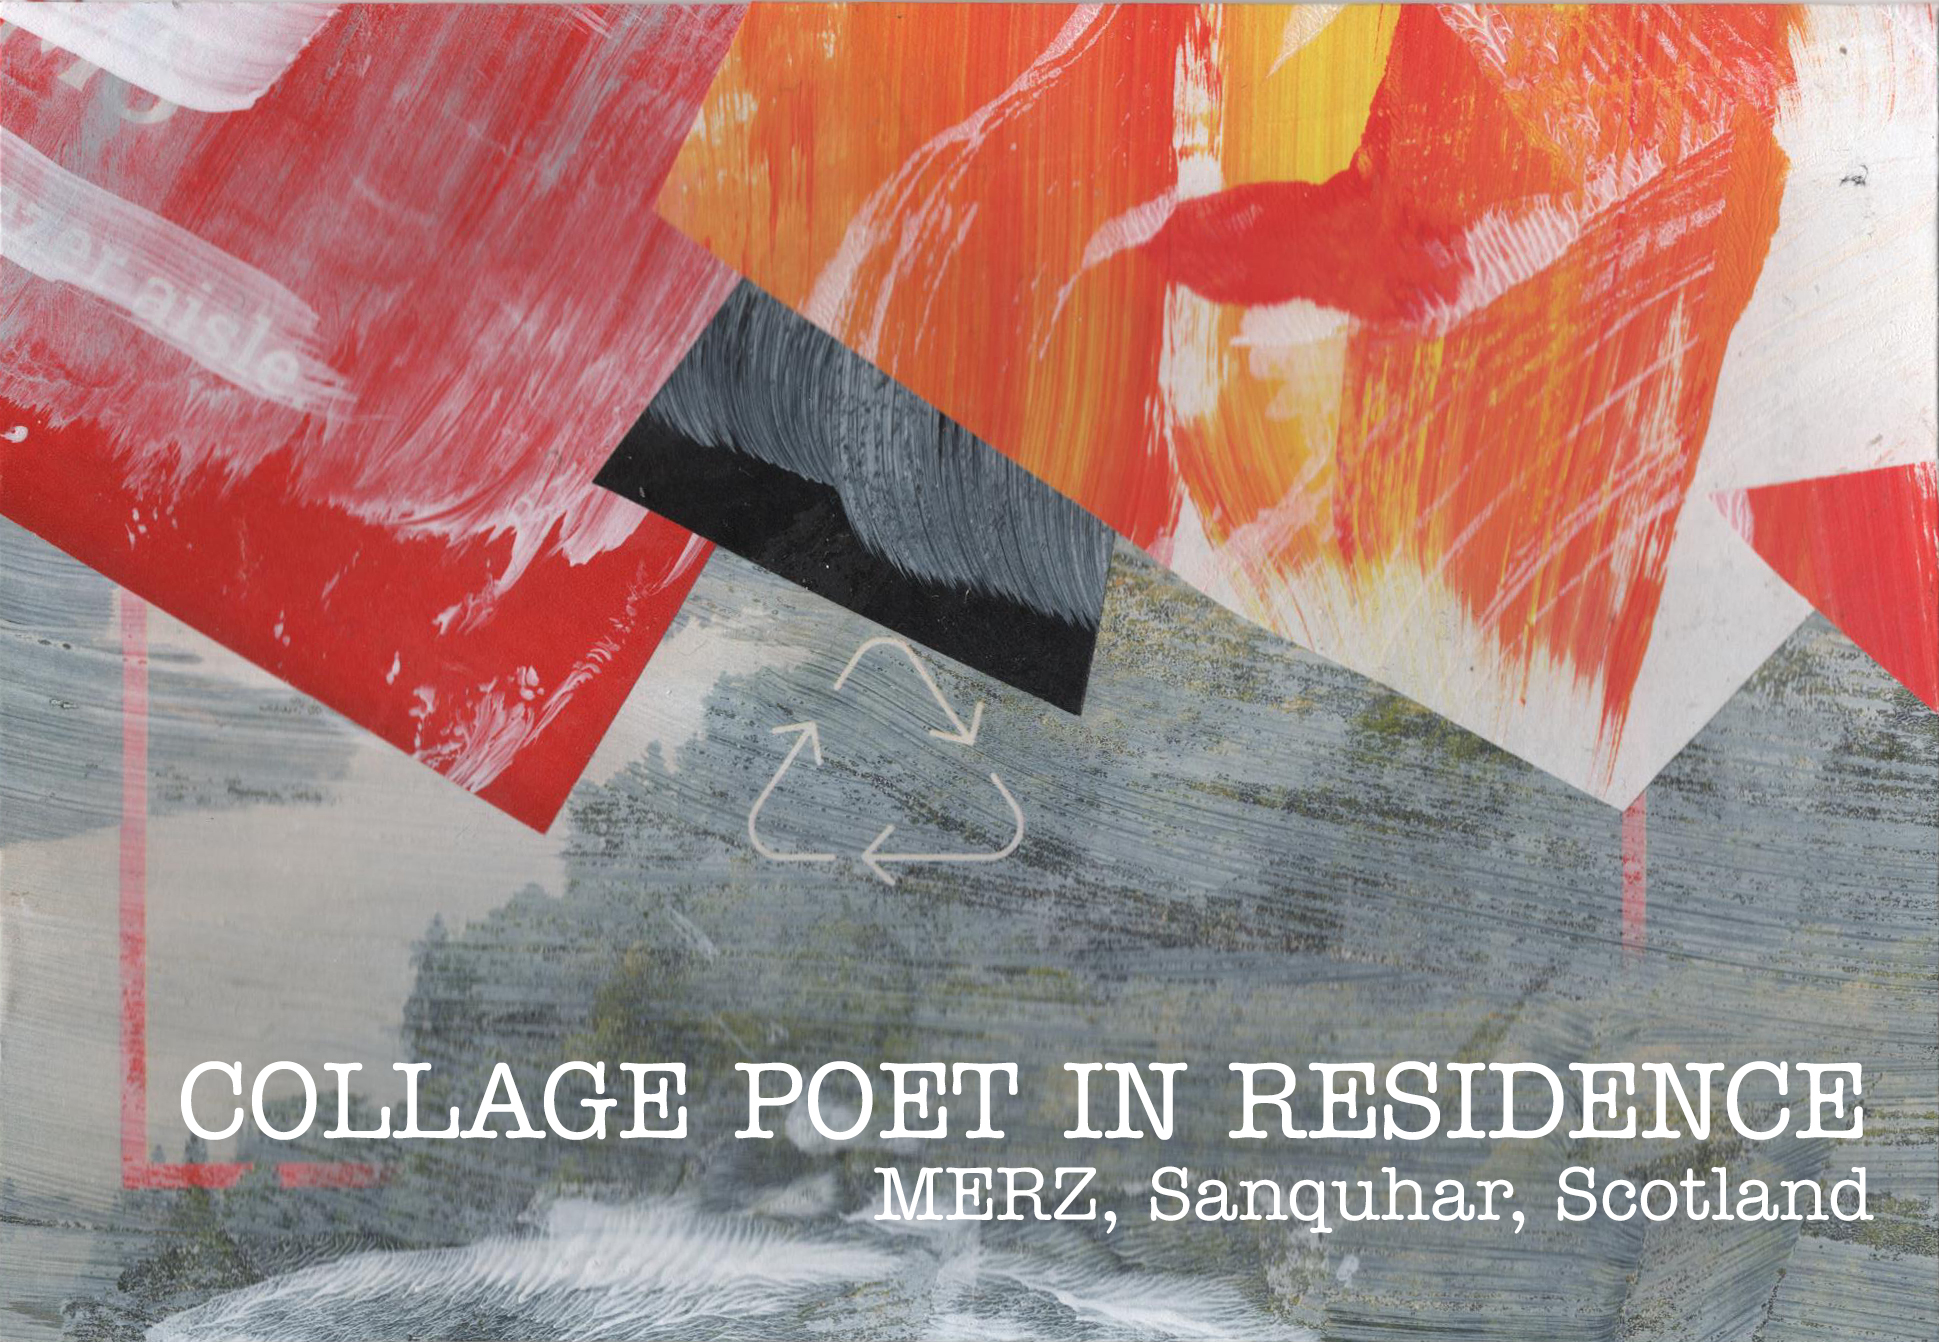 Collage Poet in Residence